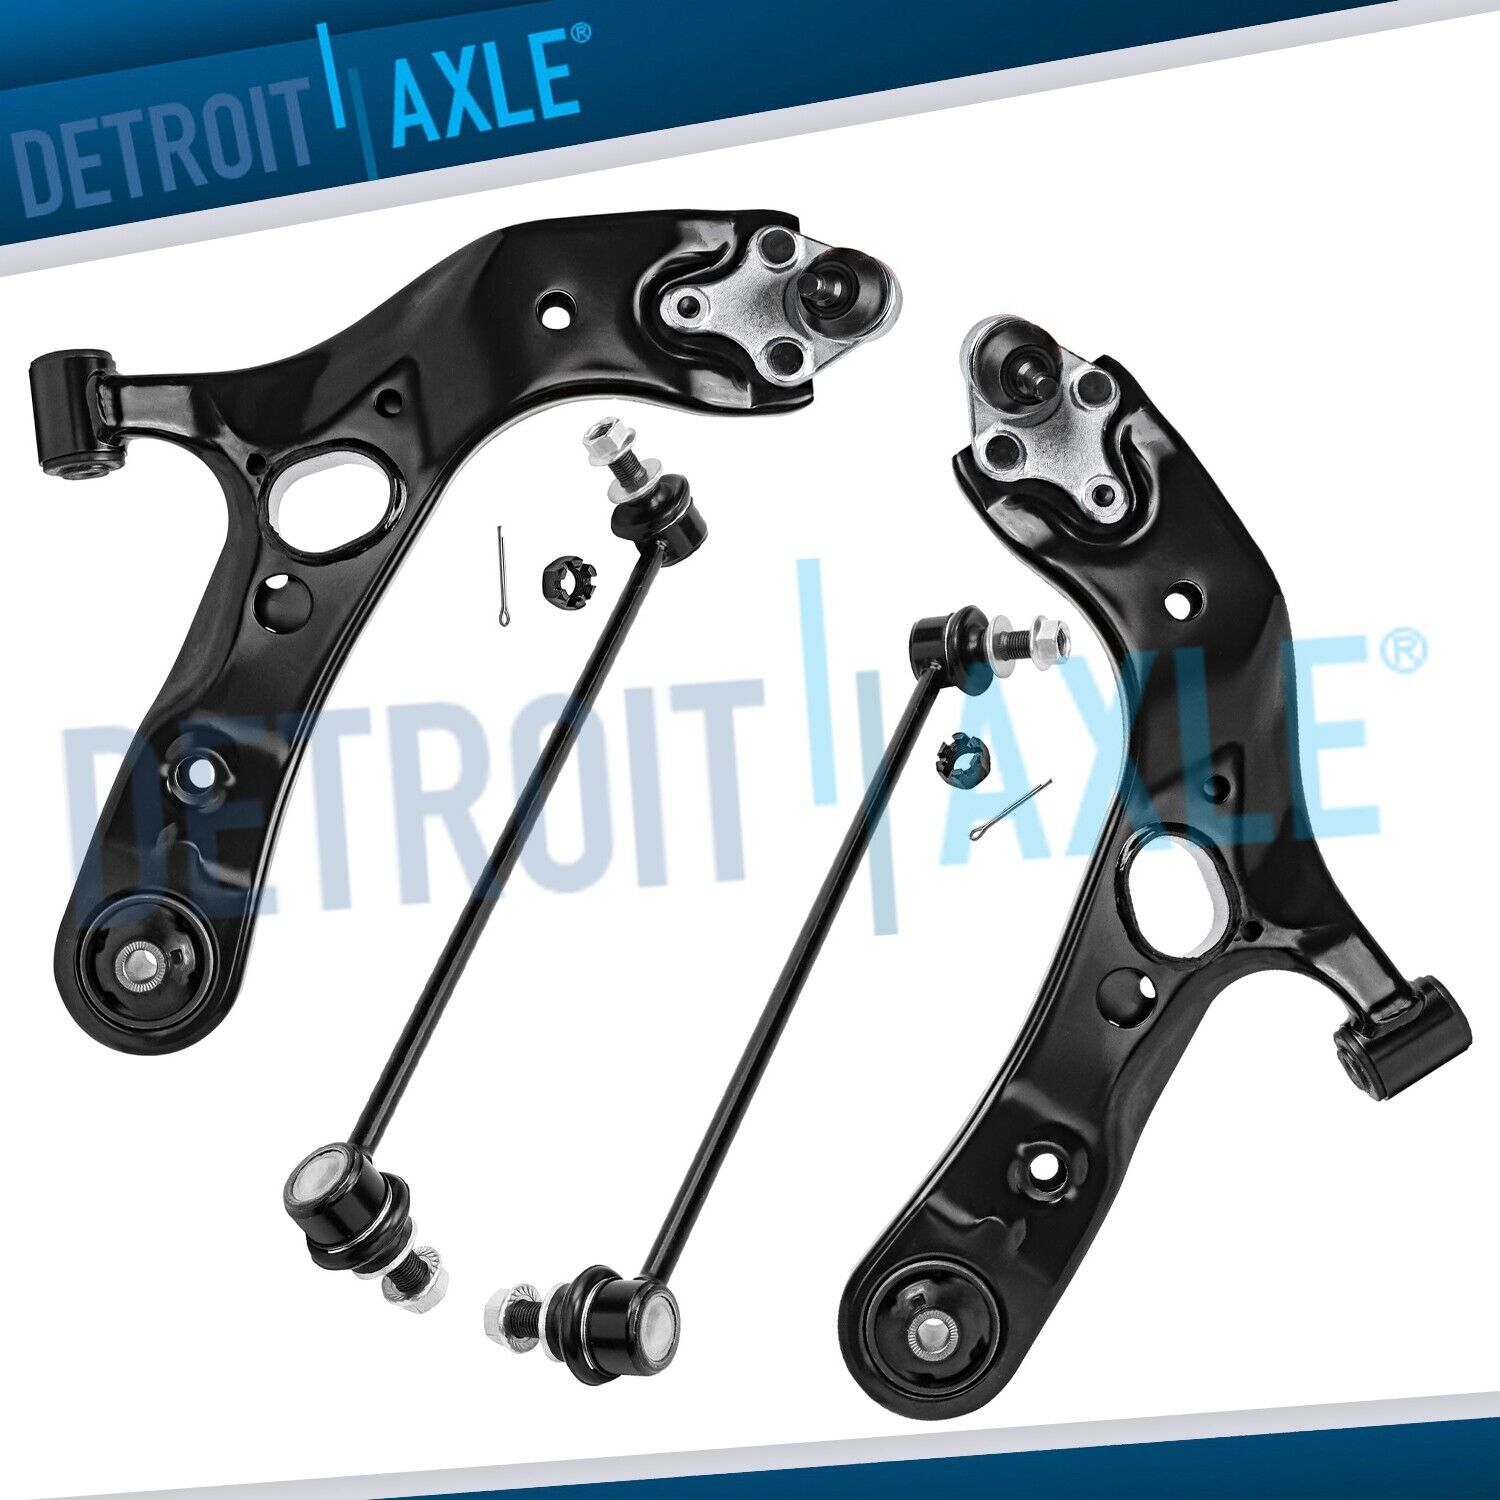 4pc Front Lower Control Arms + Sway Bars for 2006-2018 Toyota RAV4 NX200t NX300